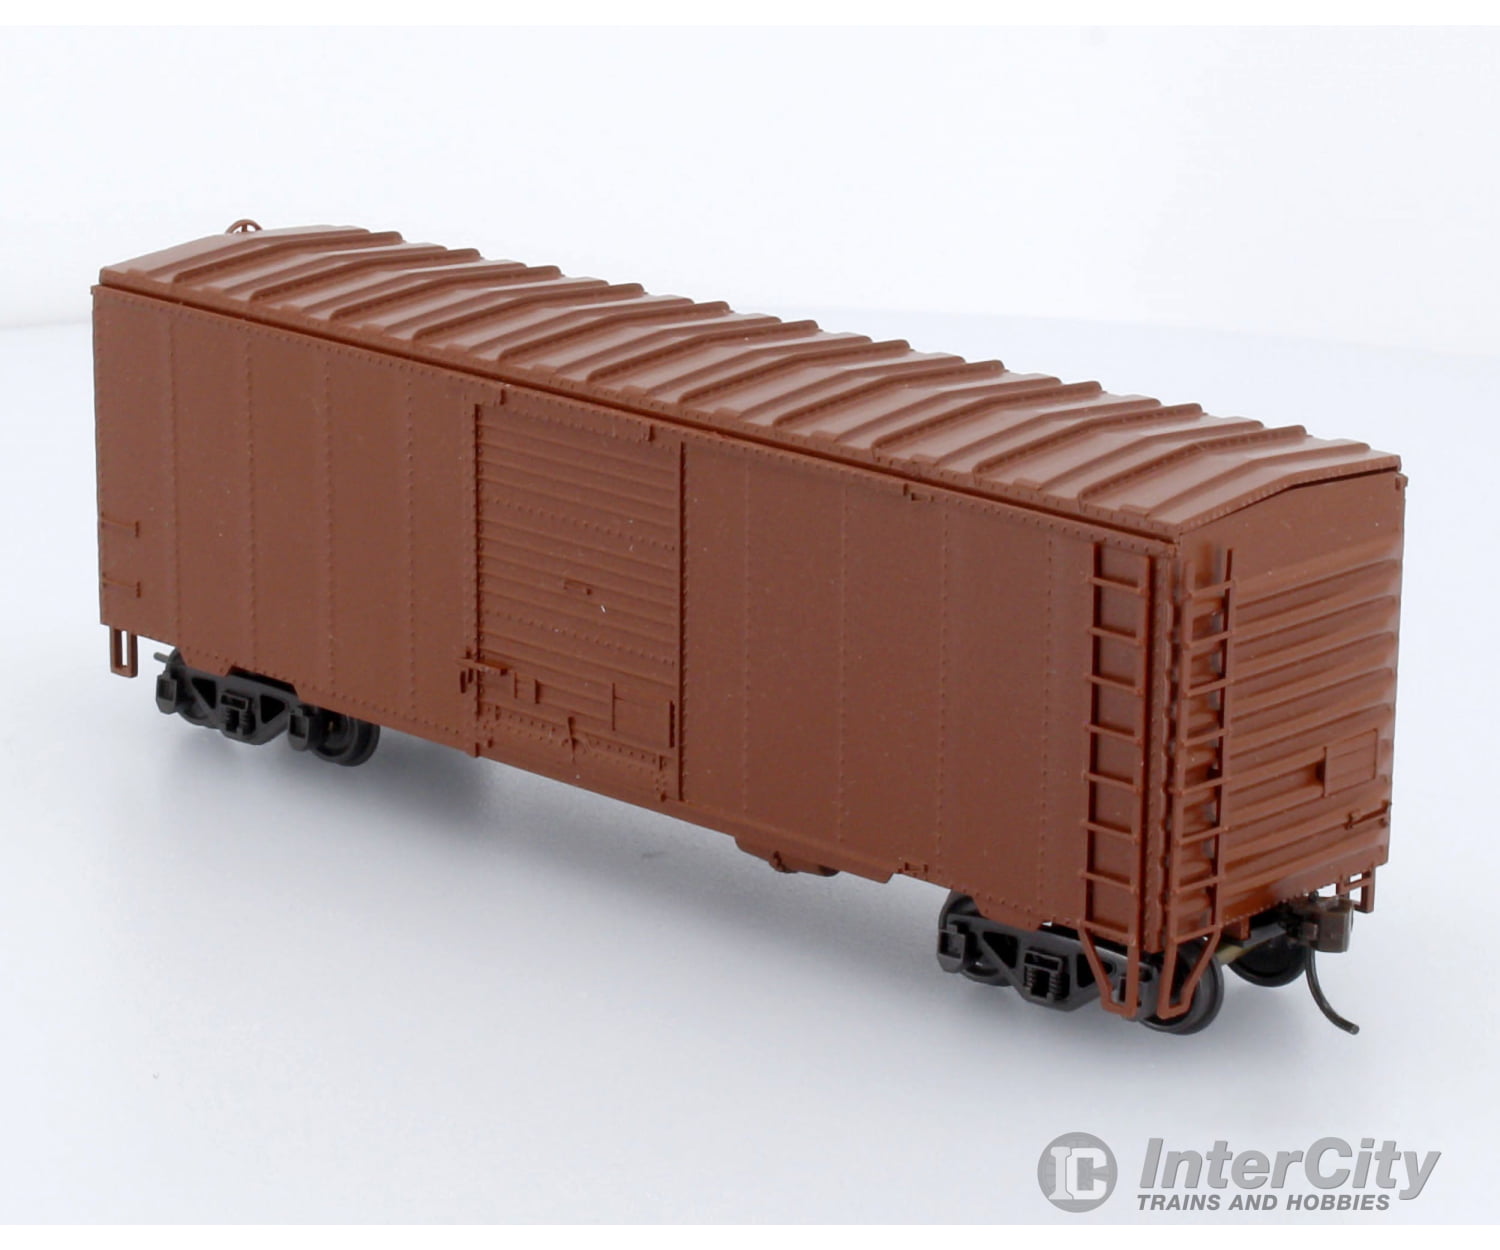 Trains Canada Ho Scale Re-Build Nsc 40 Box Car Cnr Red Unlettered Freight Cars